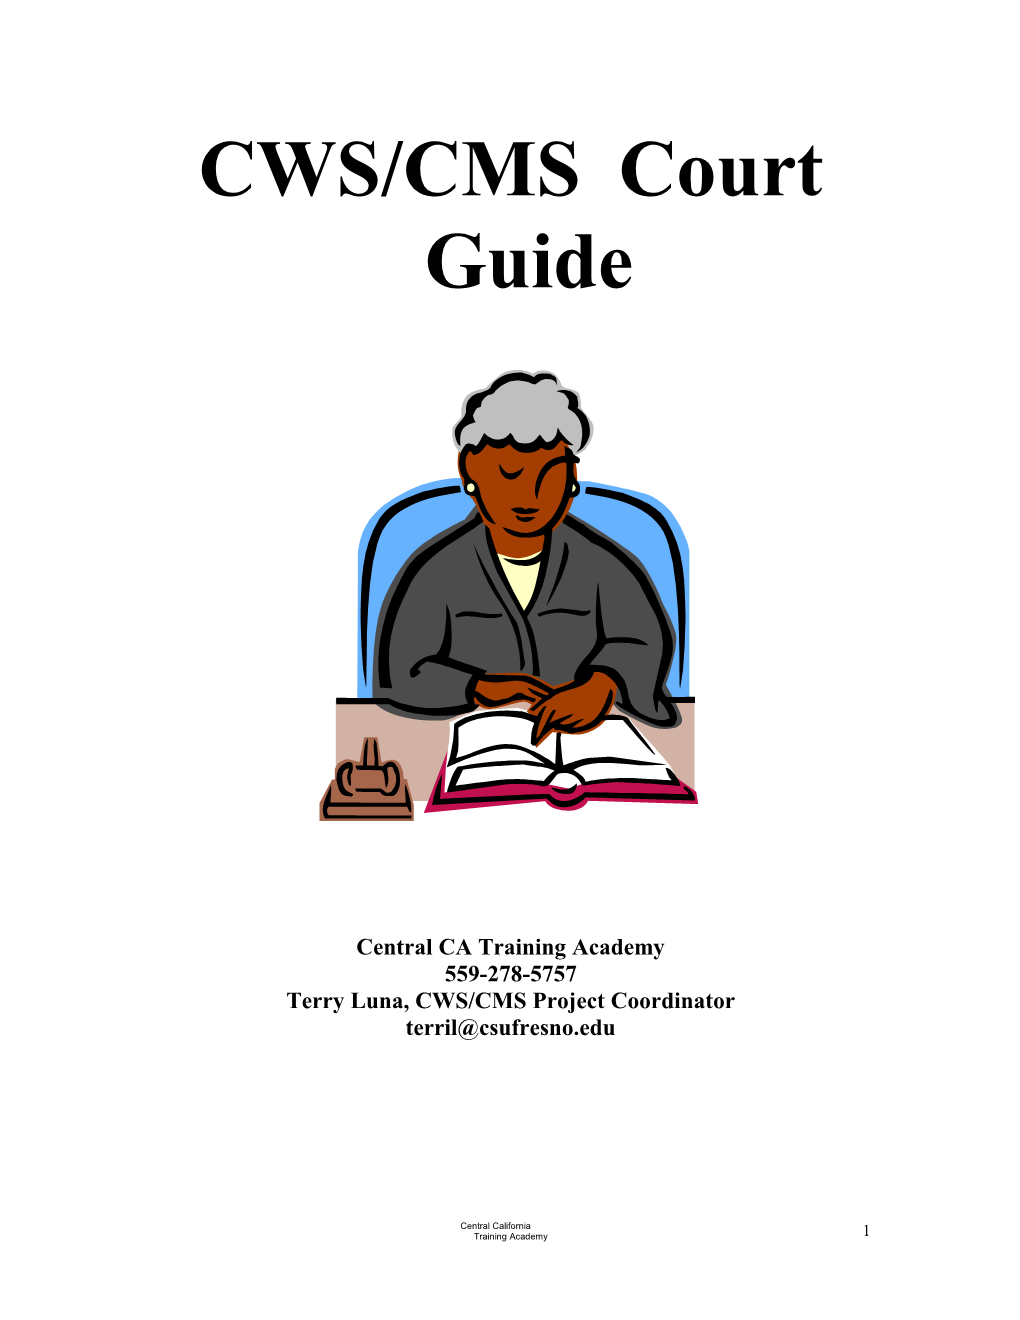 CWS/CMS Court Guide